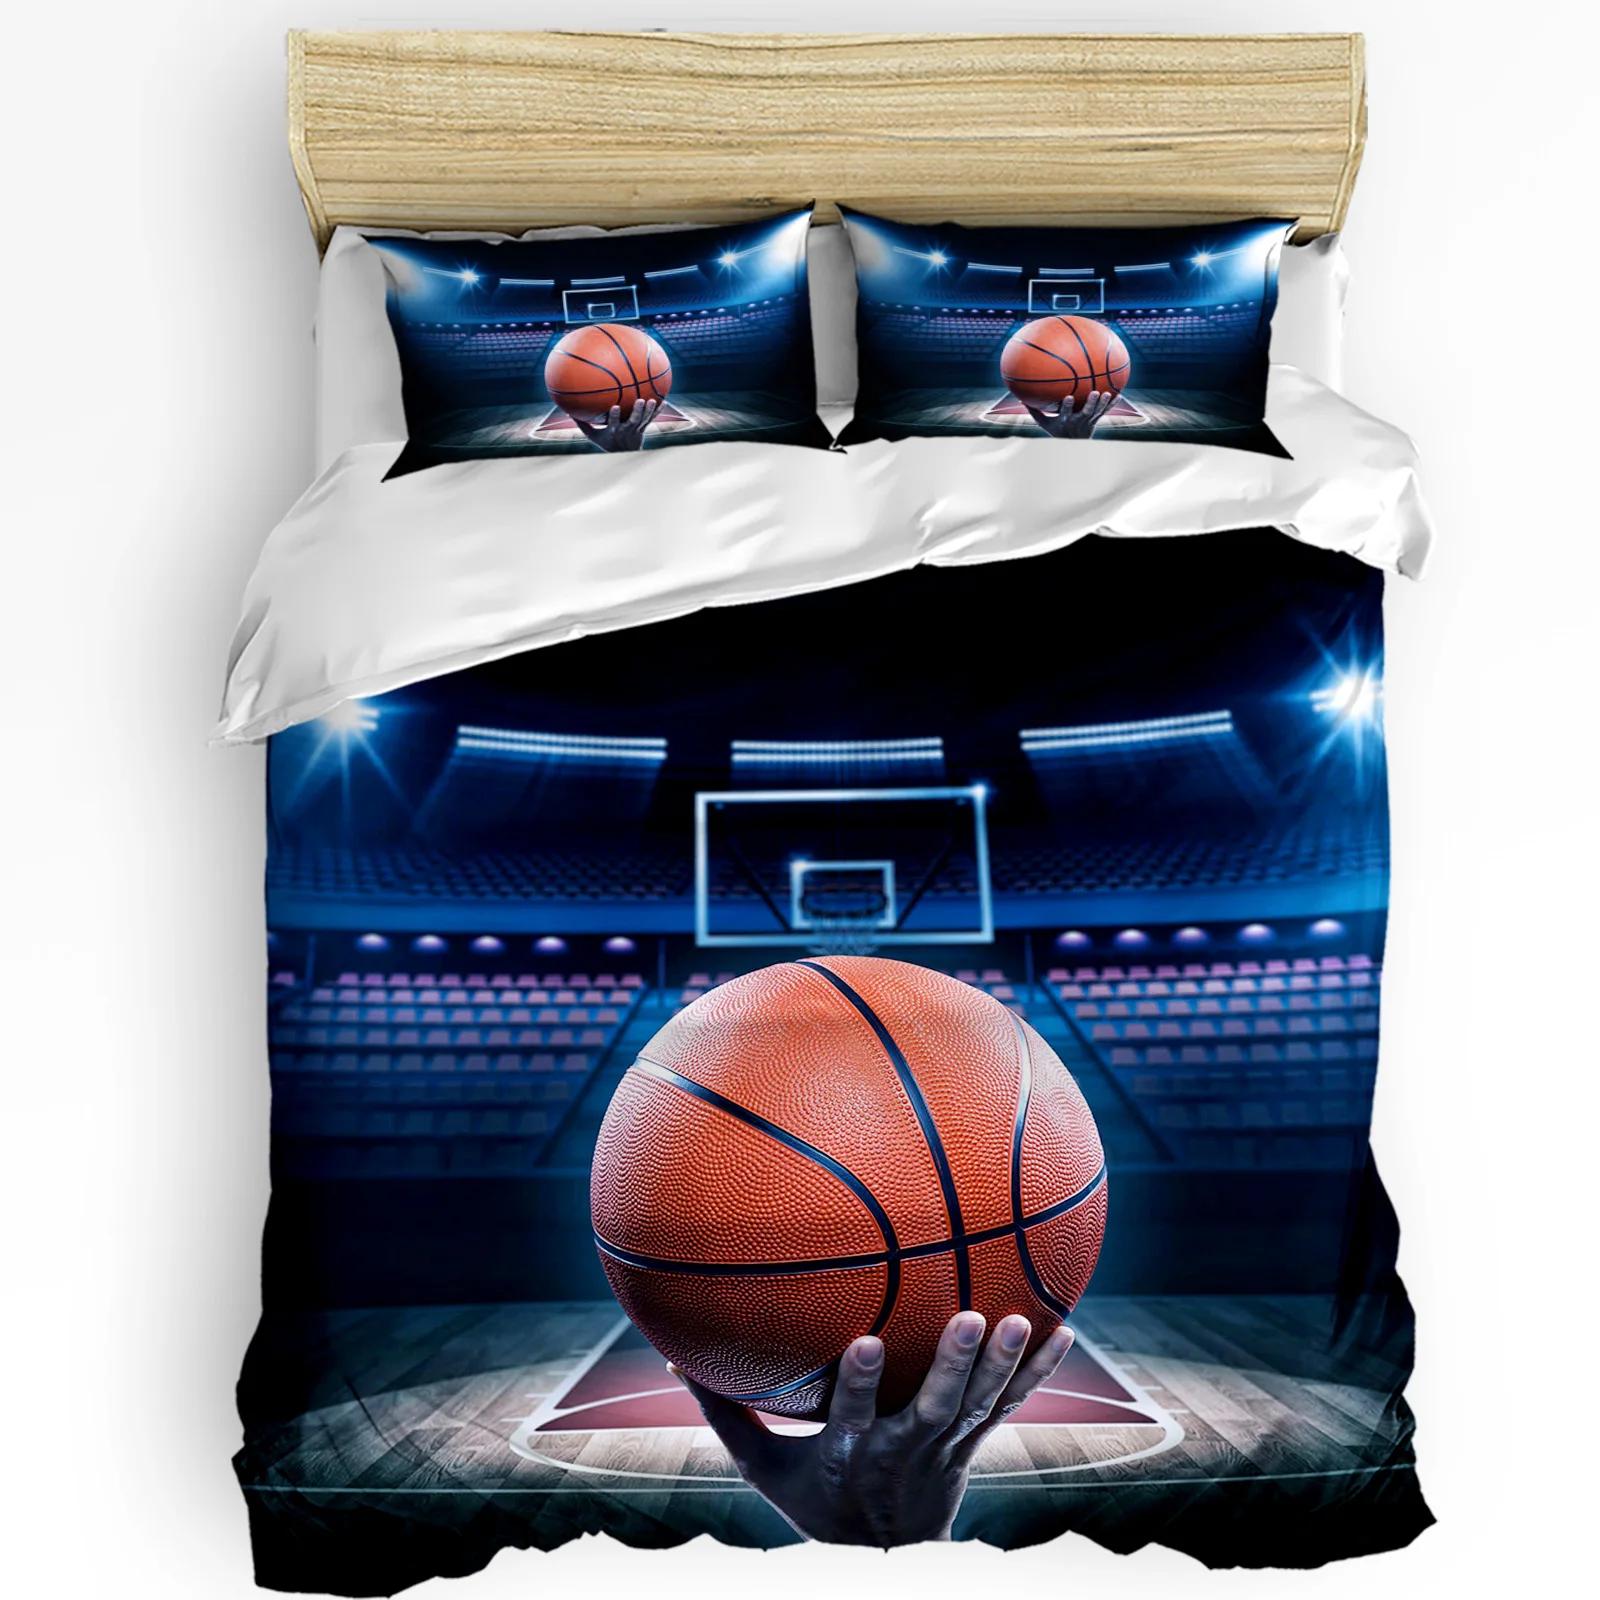 Basketball Court Playground Duvet CoverPillow Case Custom Comforter 3pcs Bedding Set Quilt Cover Double Bed Home Tex